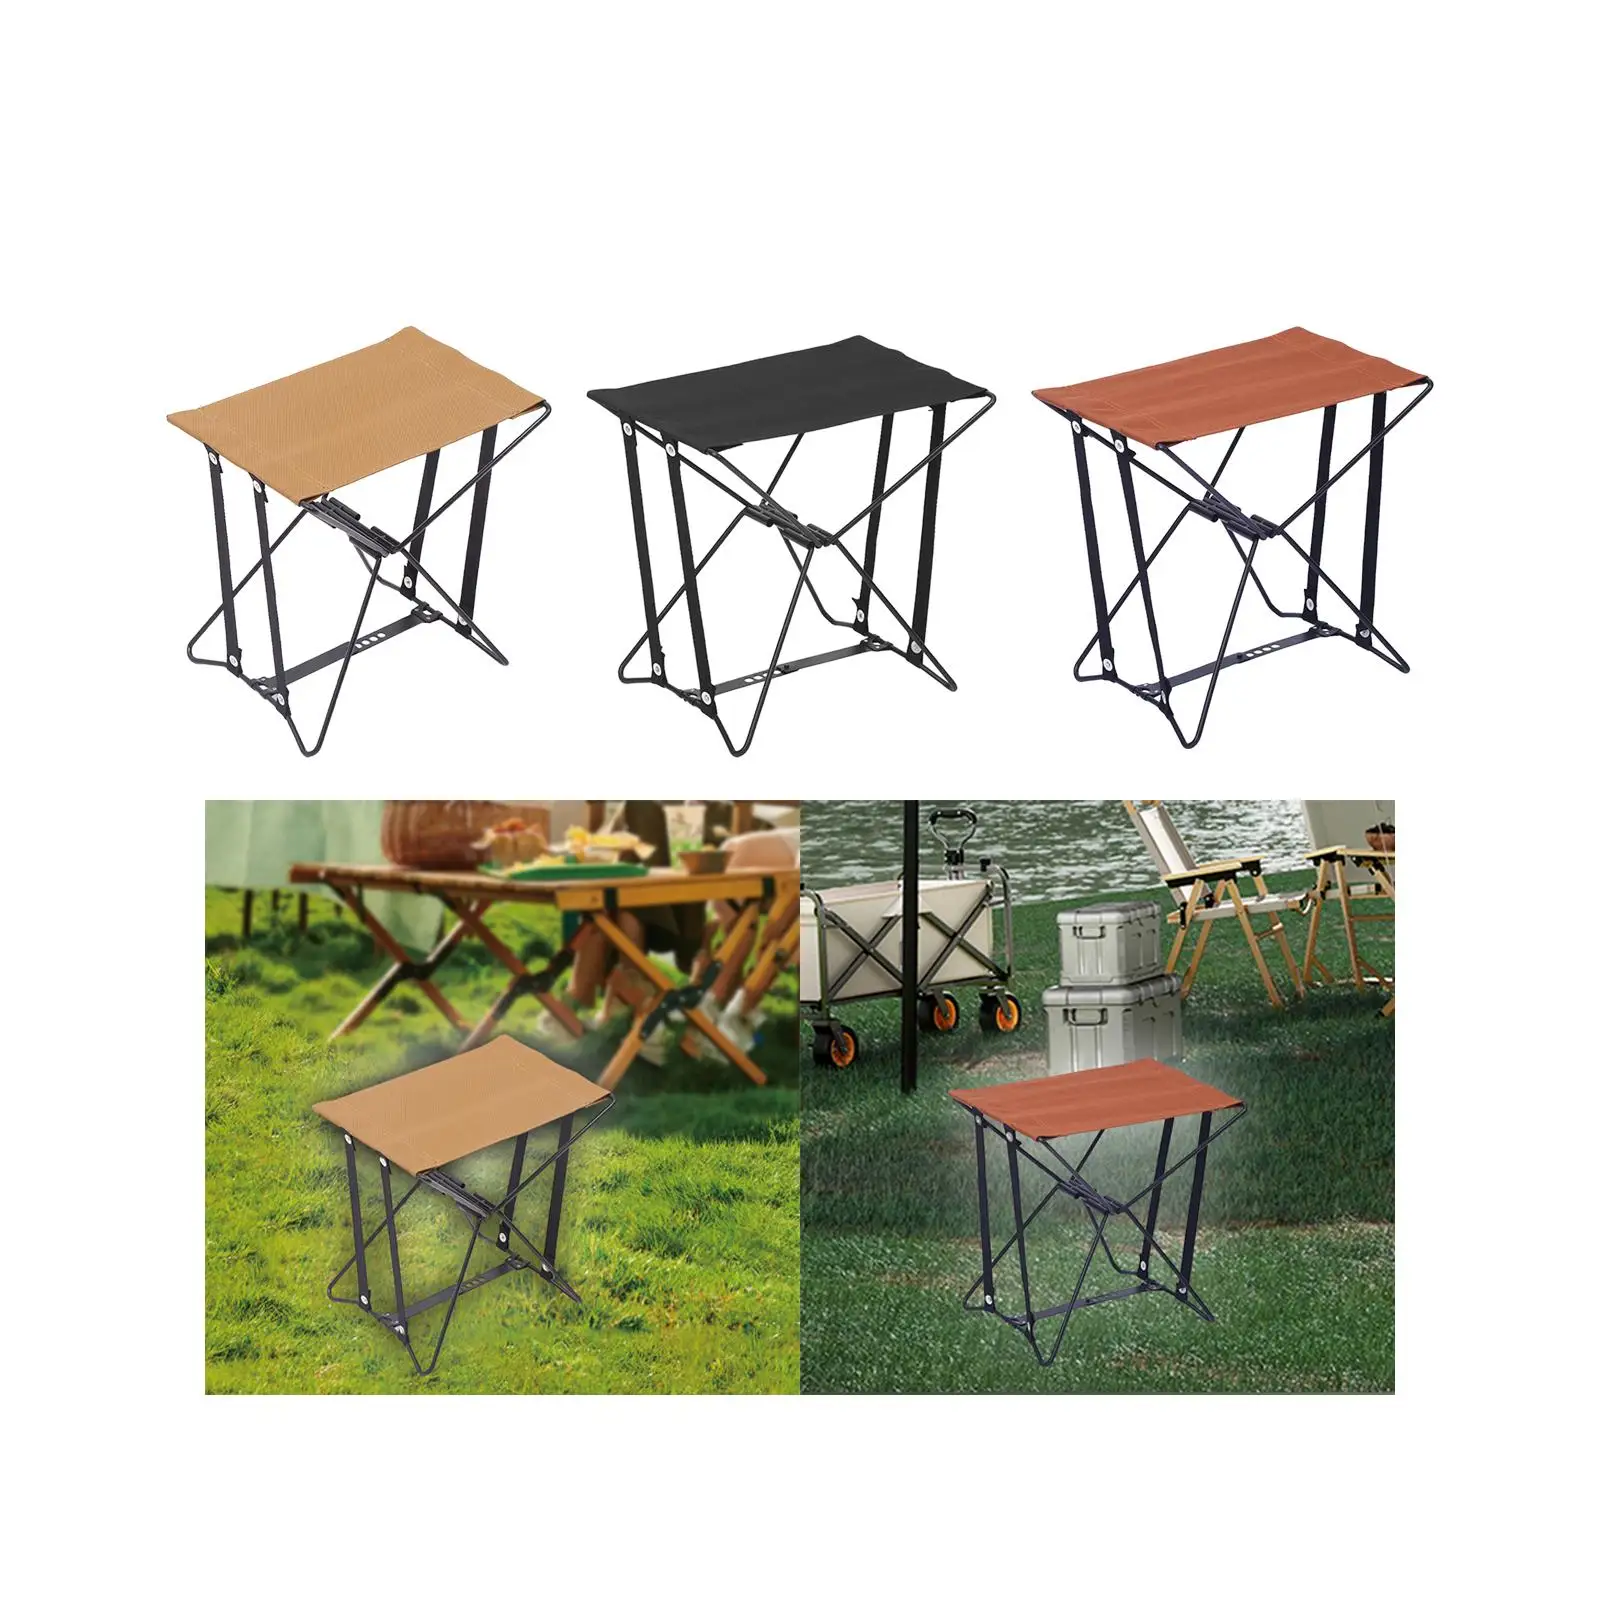 Portable Folding Stool Footstool Camping Stool Collapsible Stool Fishing Chair for Outdoor Travel Backpacking Concert Festival